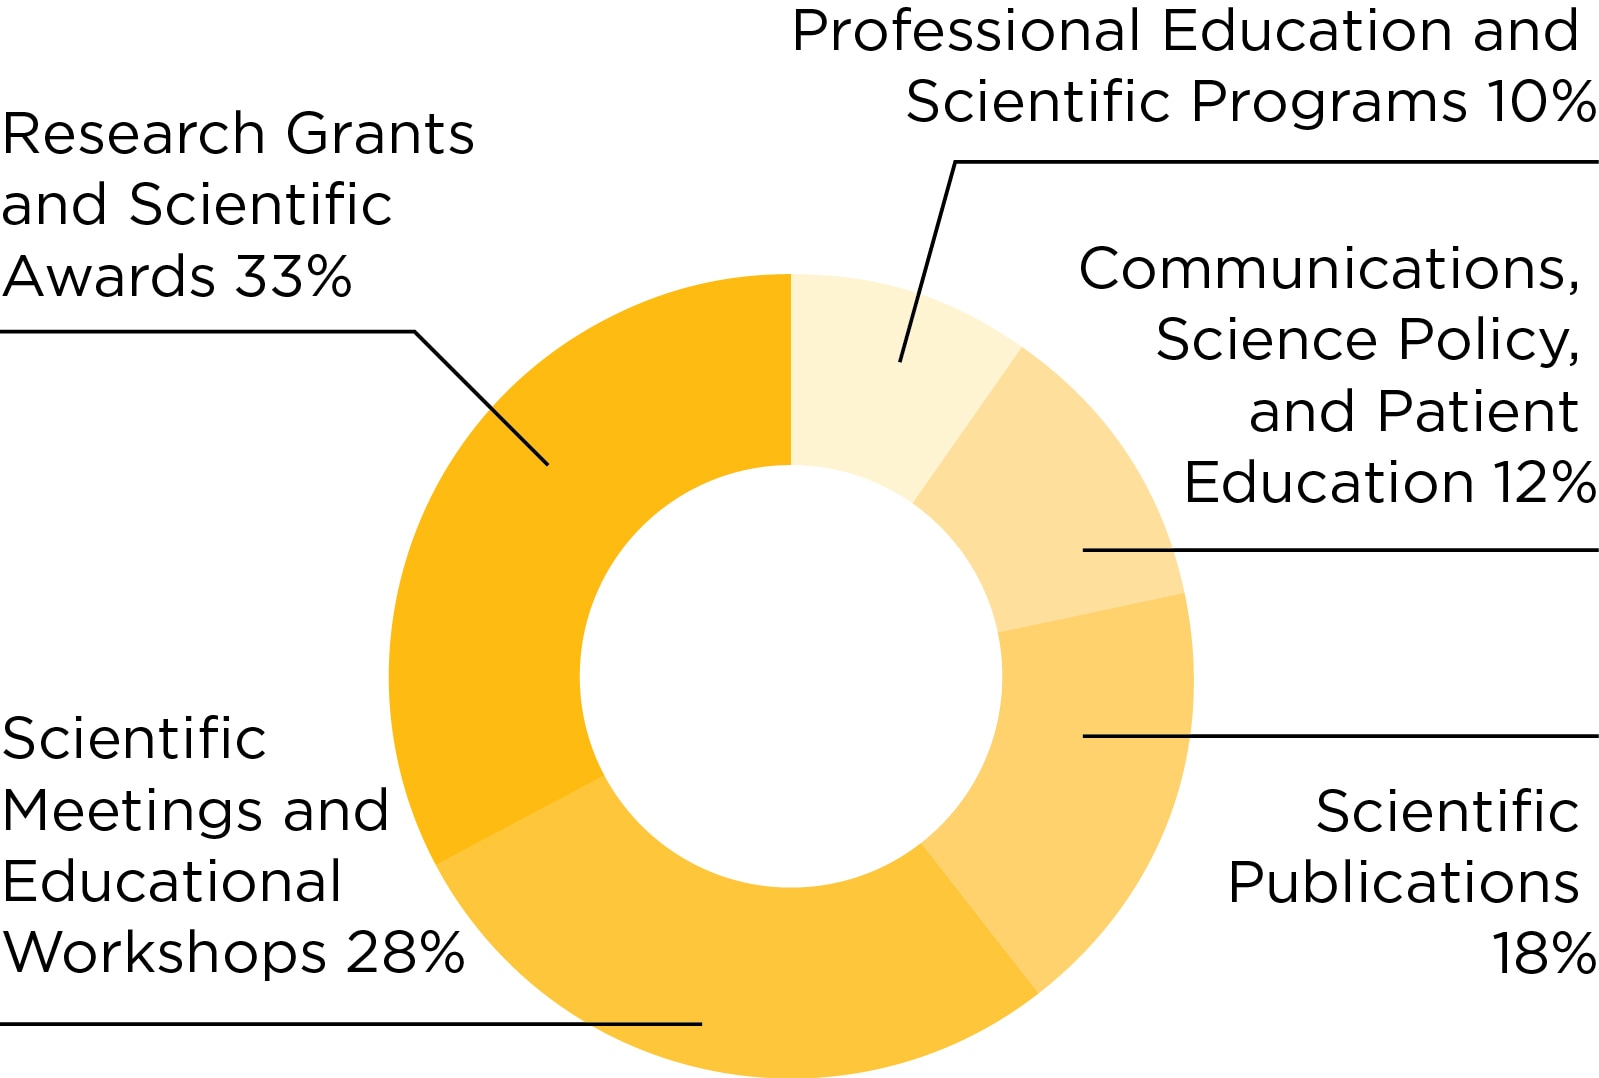 Chart: 2022 program expenses: Research grants and scientific awards, 33 percent; scientific meetings and educational workshops, 28 percent; scientific publications, 18 percent; professional education and scientific programs, 12 percent; communications, science policy, and patient education, 10 percent.